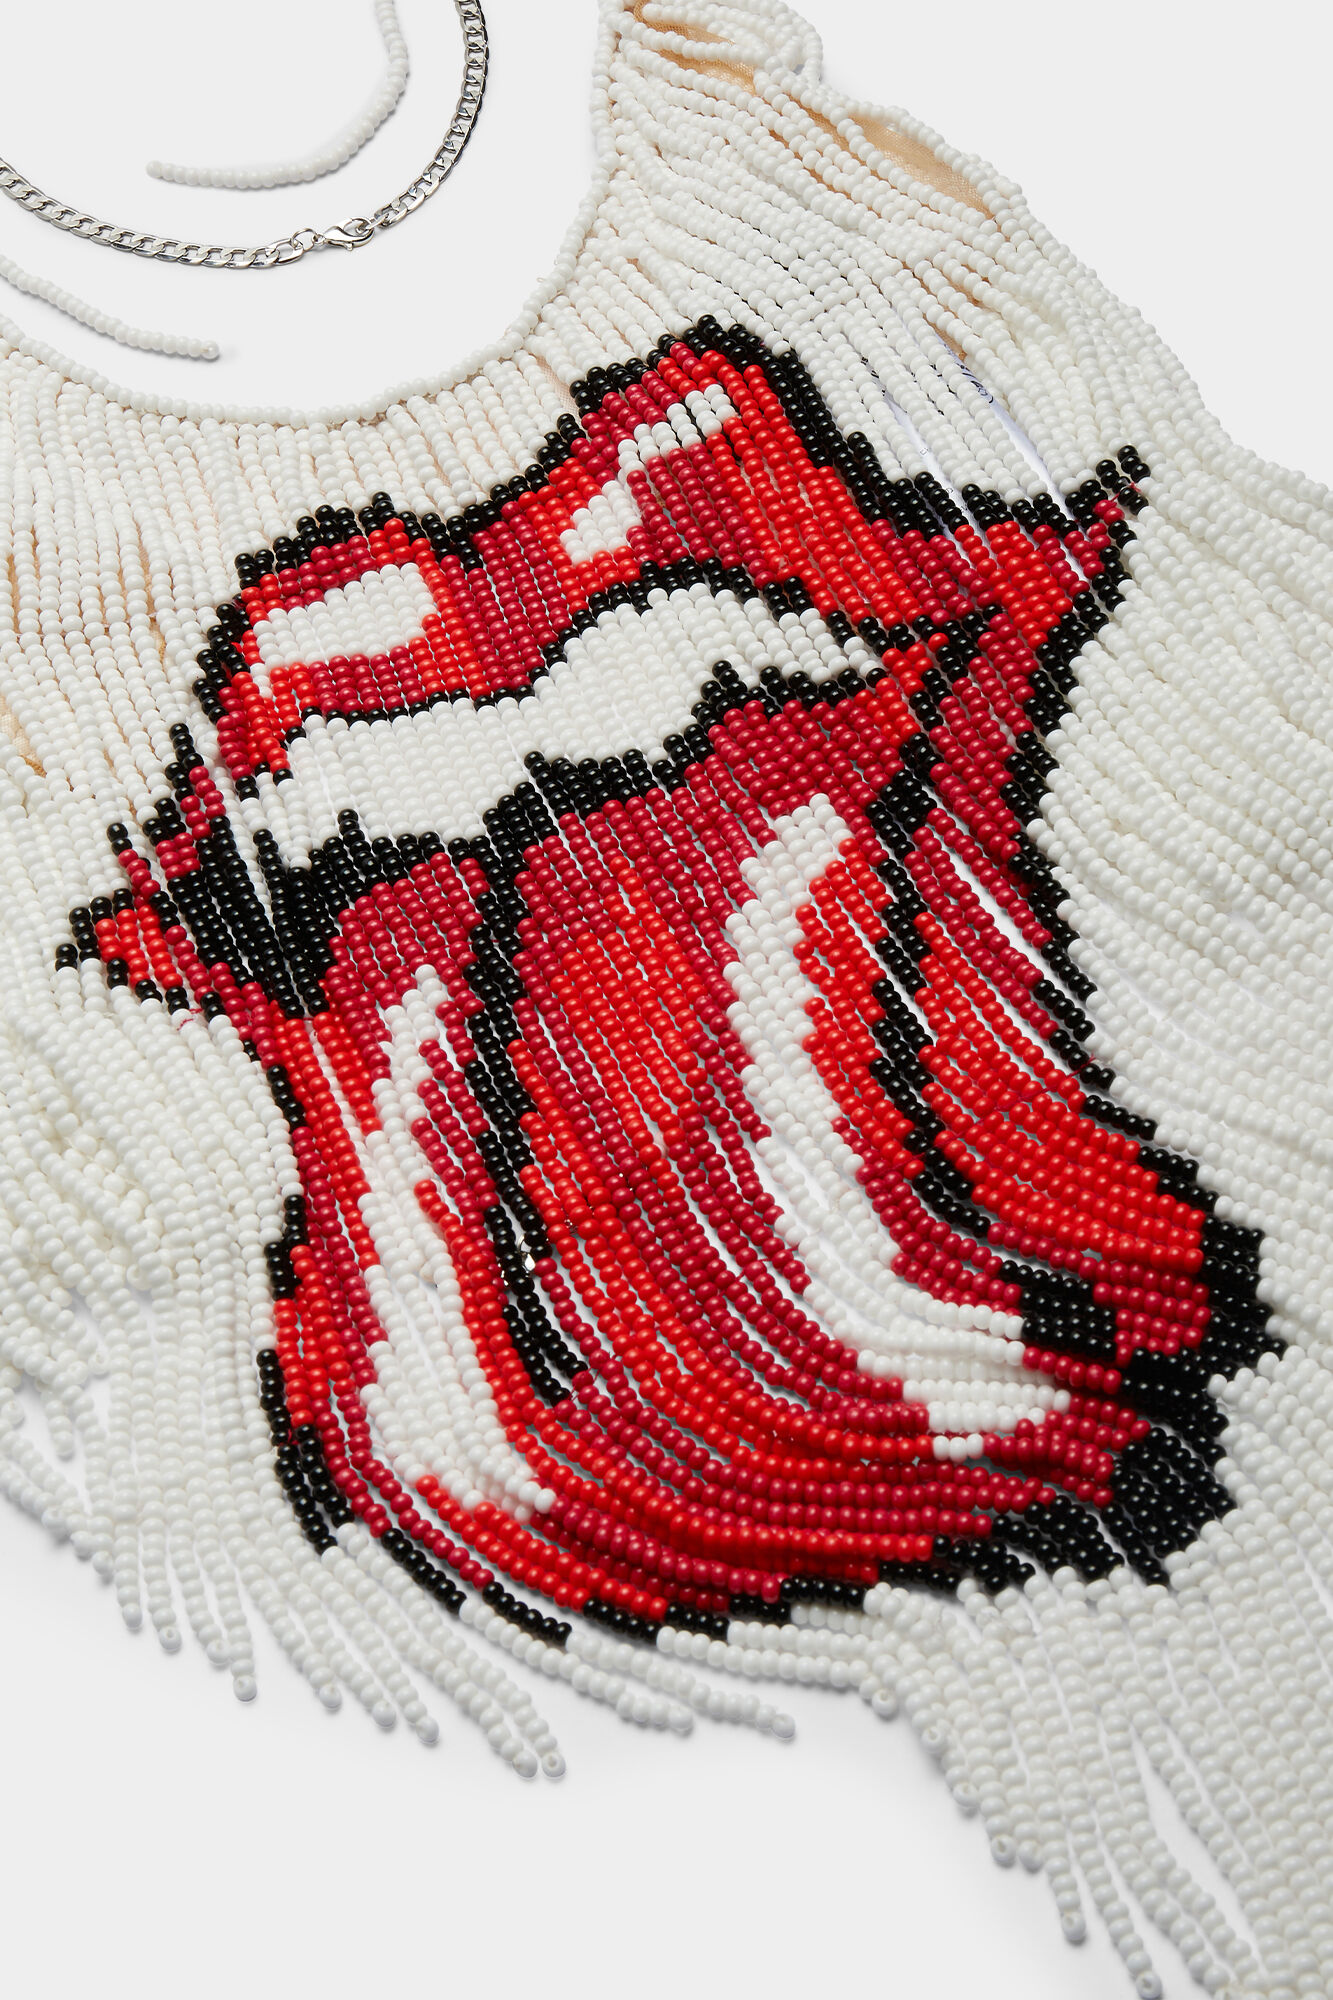 Rolling Stones Embroidery Top